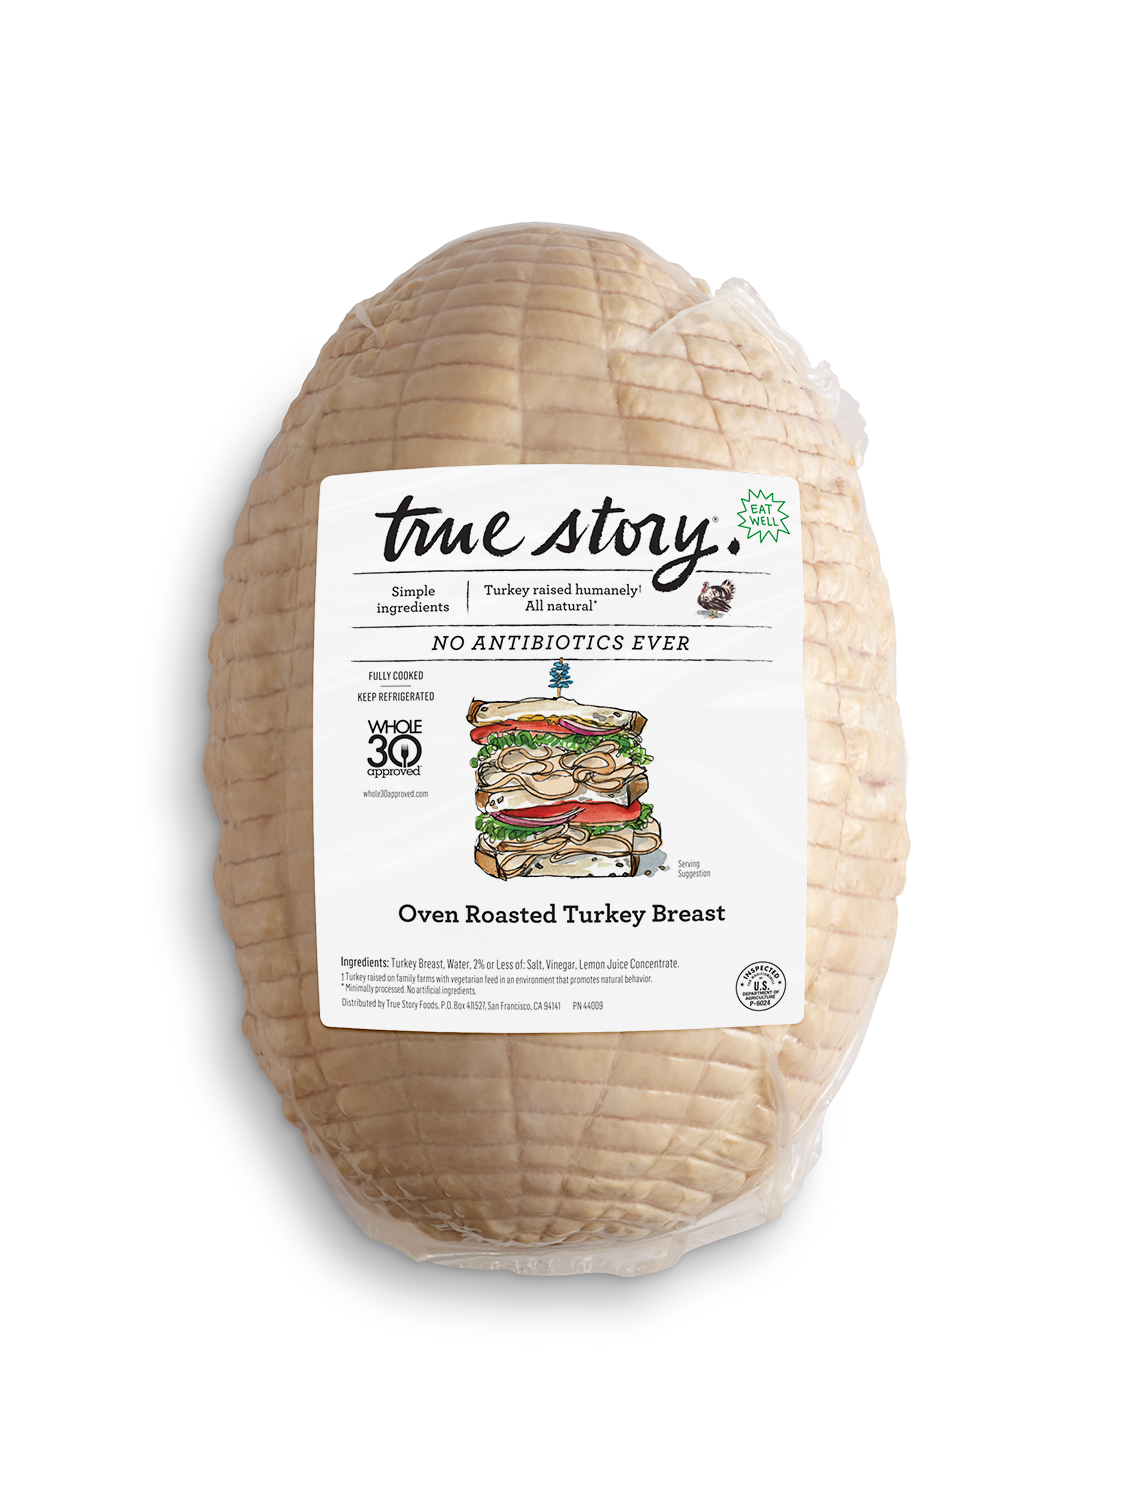 Oven Roasted Turkey Breast Packaging